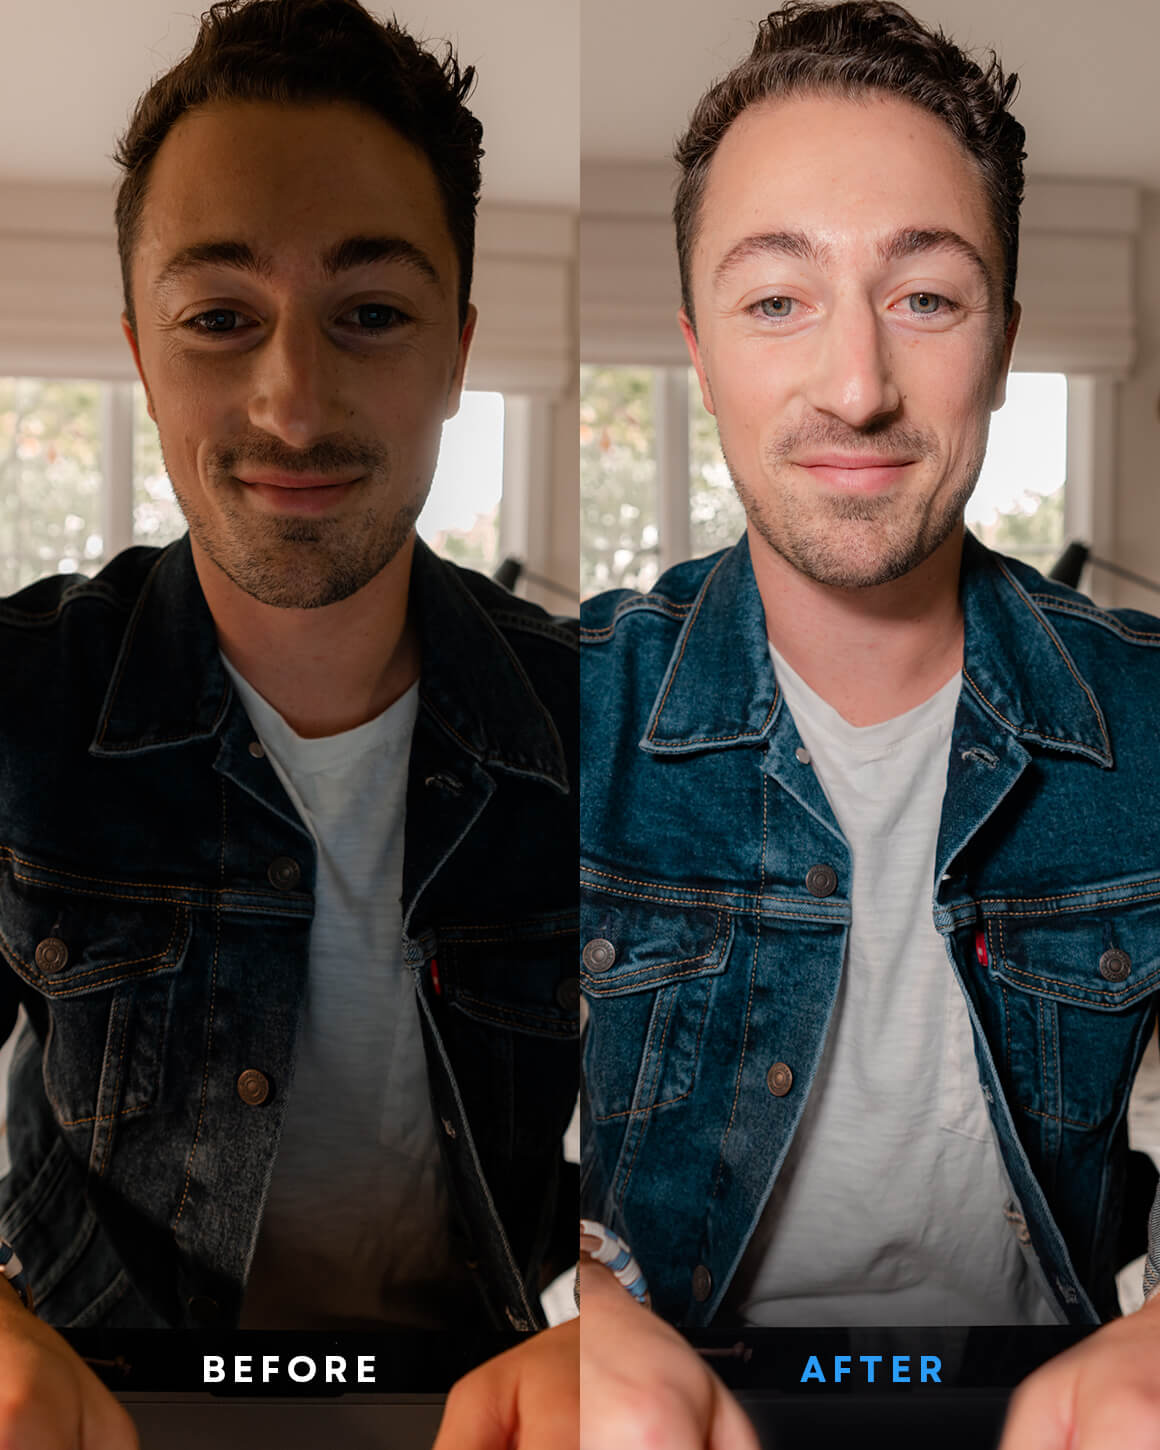 Side-by-side comparison of man's appearance with and without lighting from Lume Cube's Broadcast Lighting Kit.